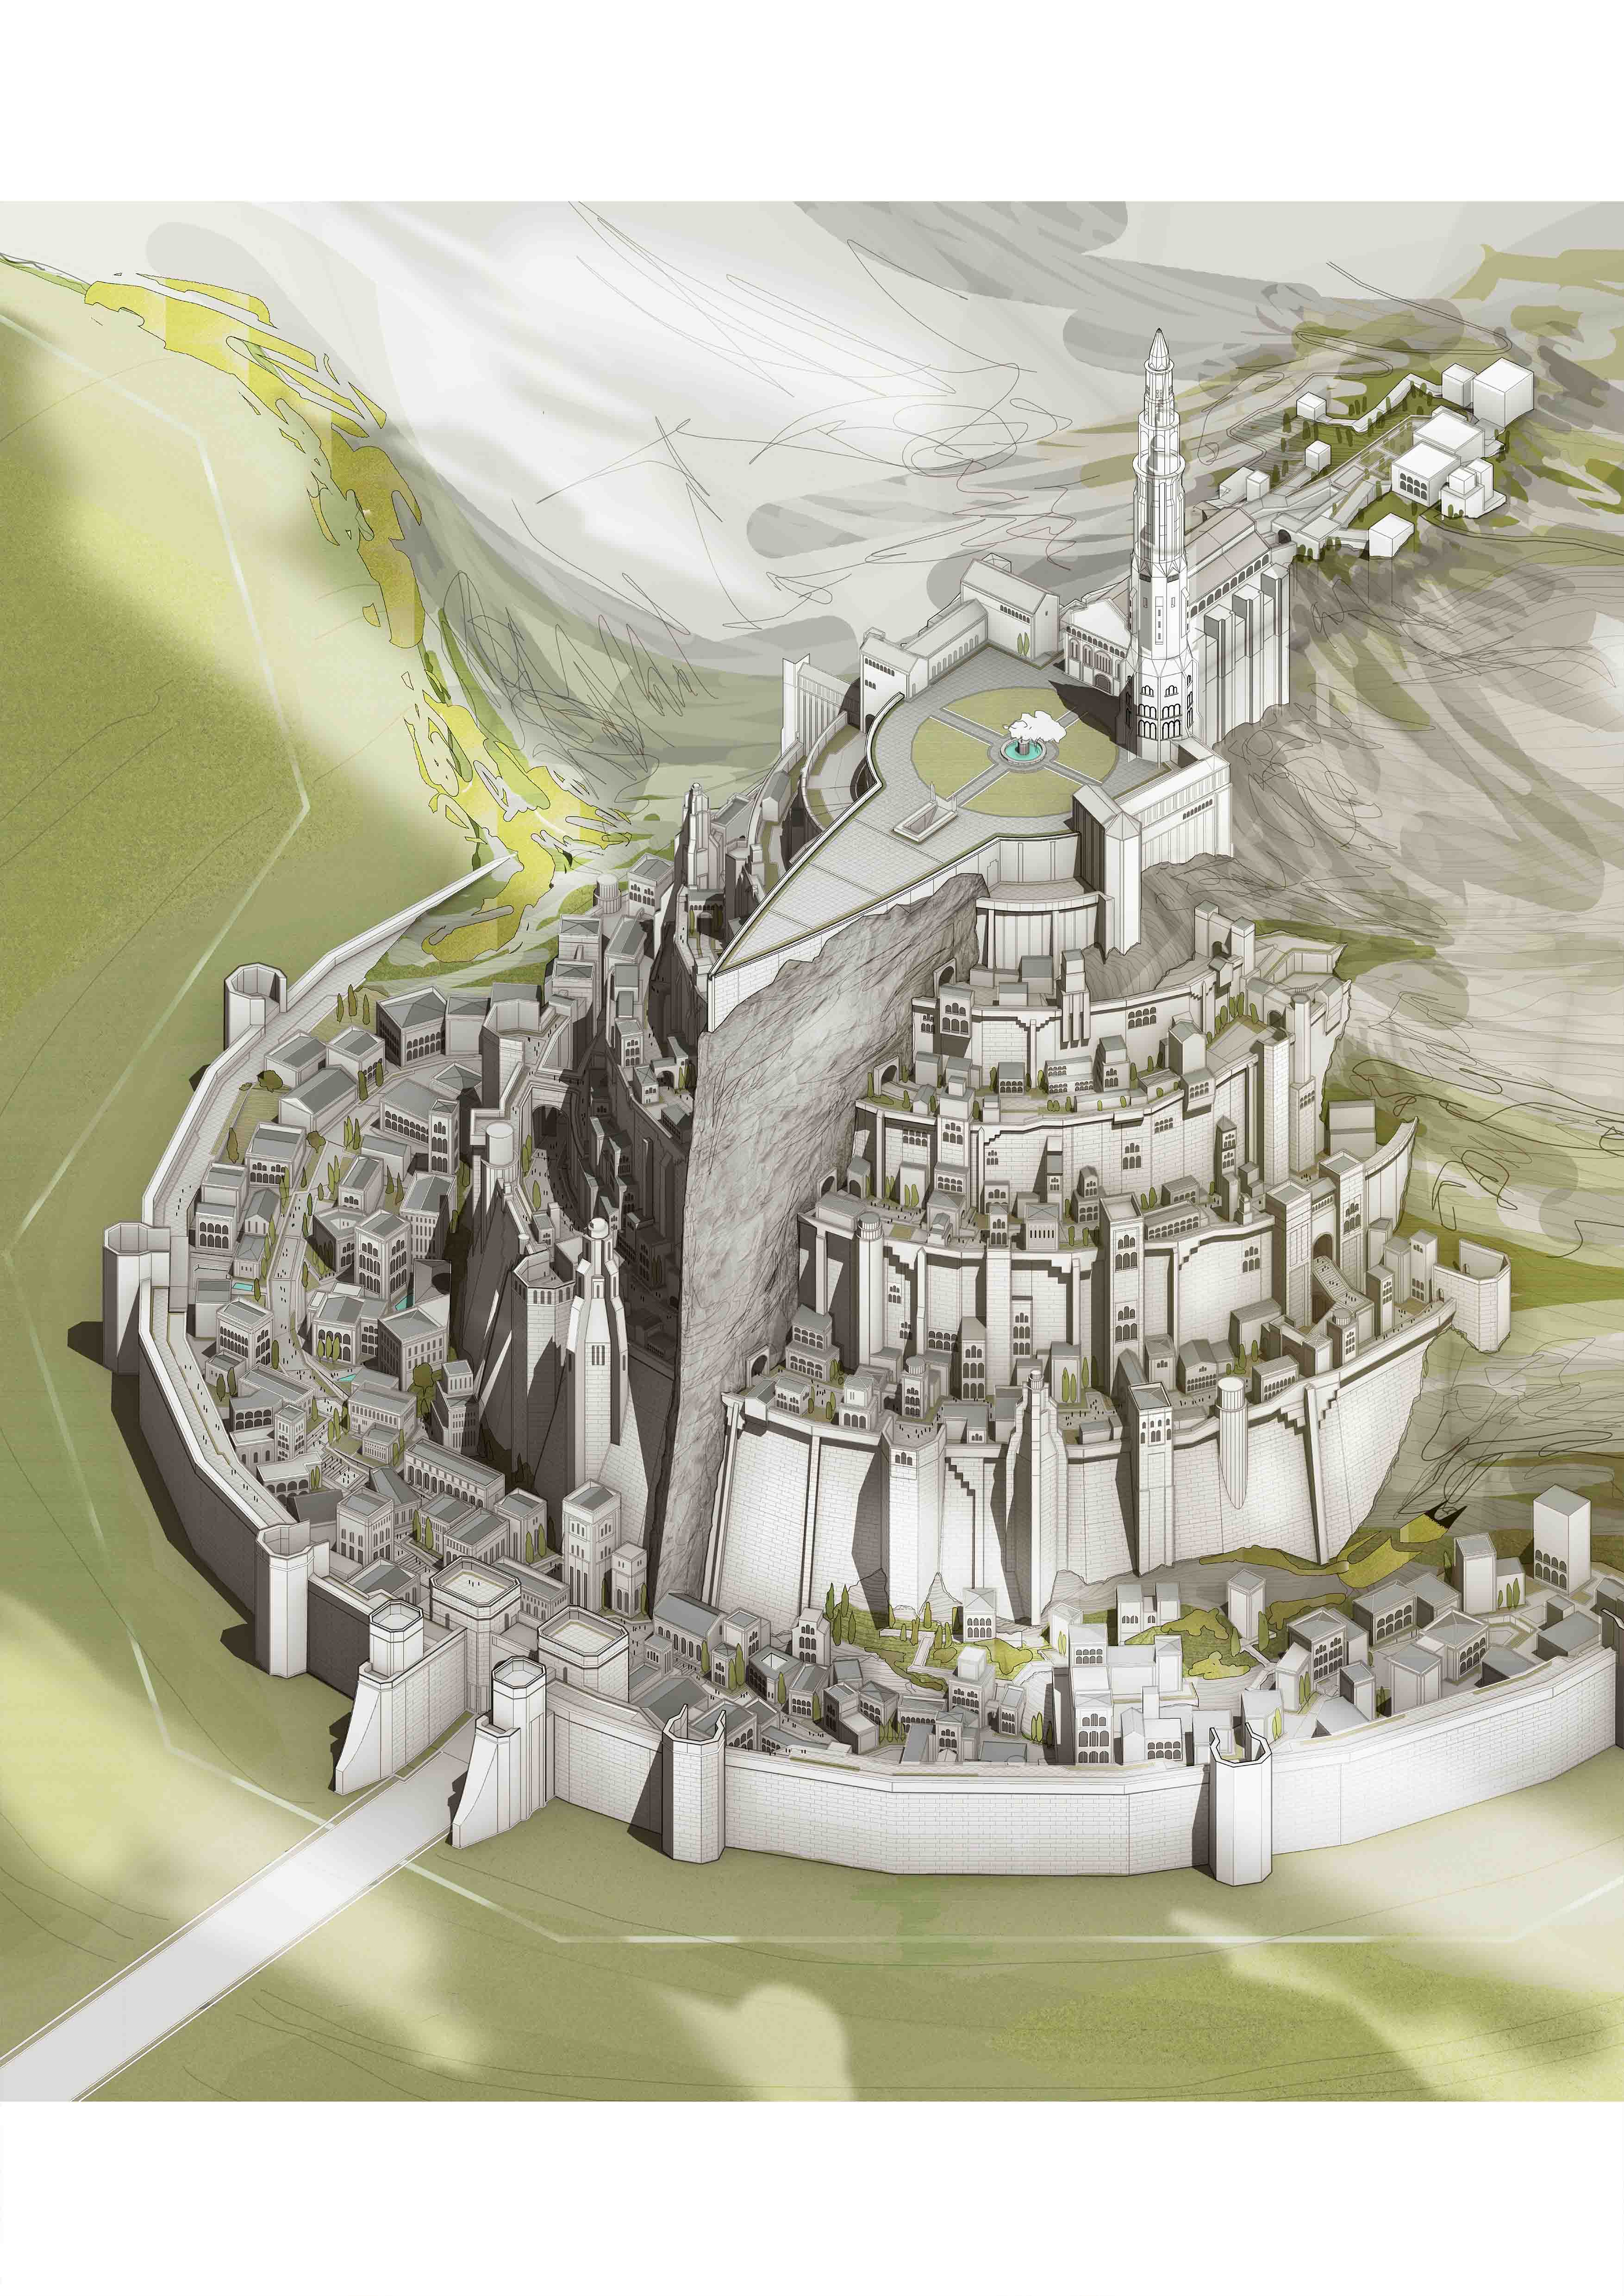 The Lord of the Rings - Minas Tirith art.